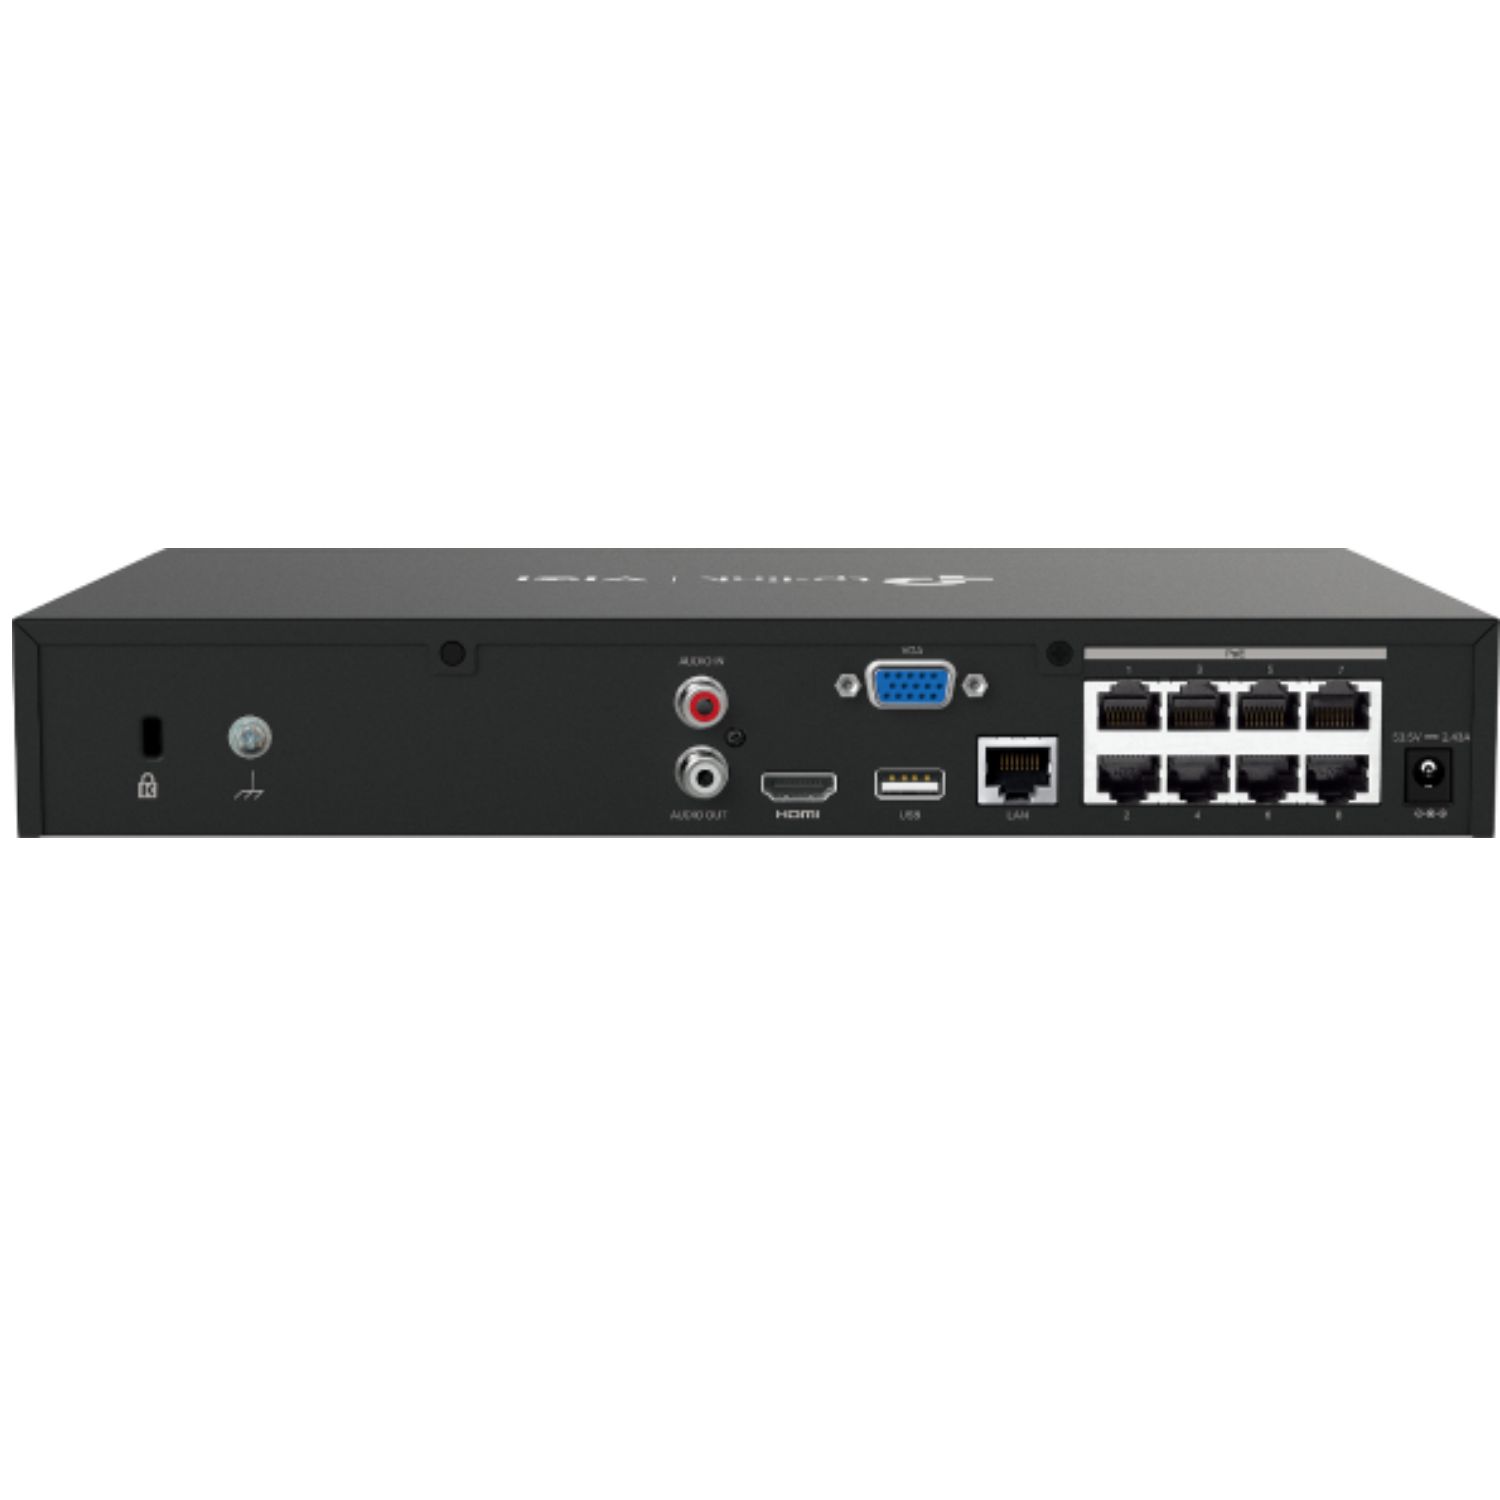  VIGI 8 Channel PoE+ Network Video Recorder, 113W PoE Budget, H.265+, 4K Video Output & 16MP Decoding Capacity (HDD Not Included)  